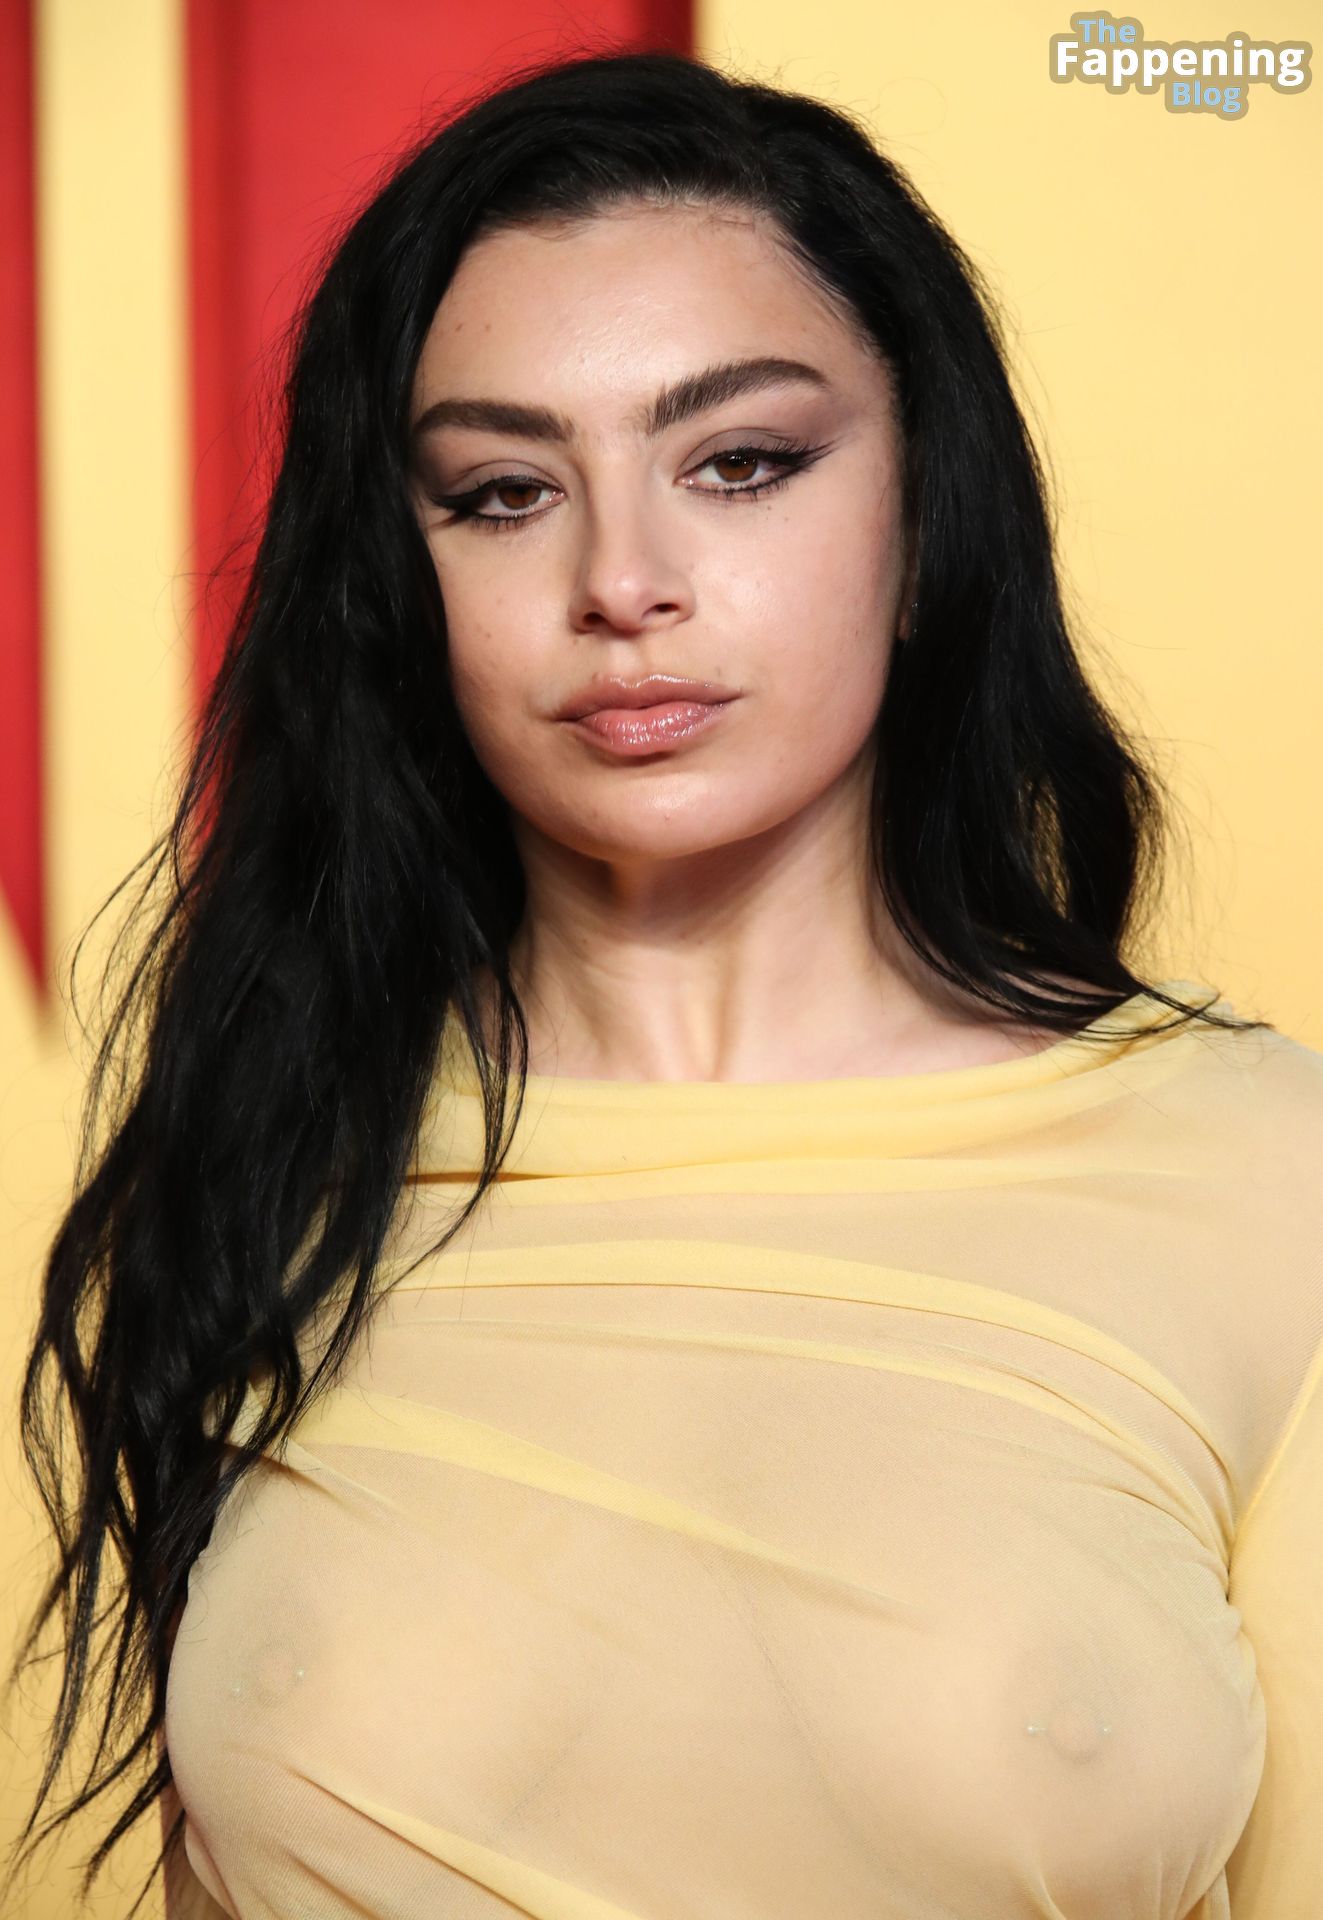 Charli-XCX-Nude-Sexy-7-The-Fappening-Blog.jpg